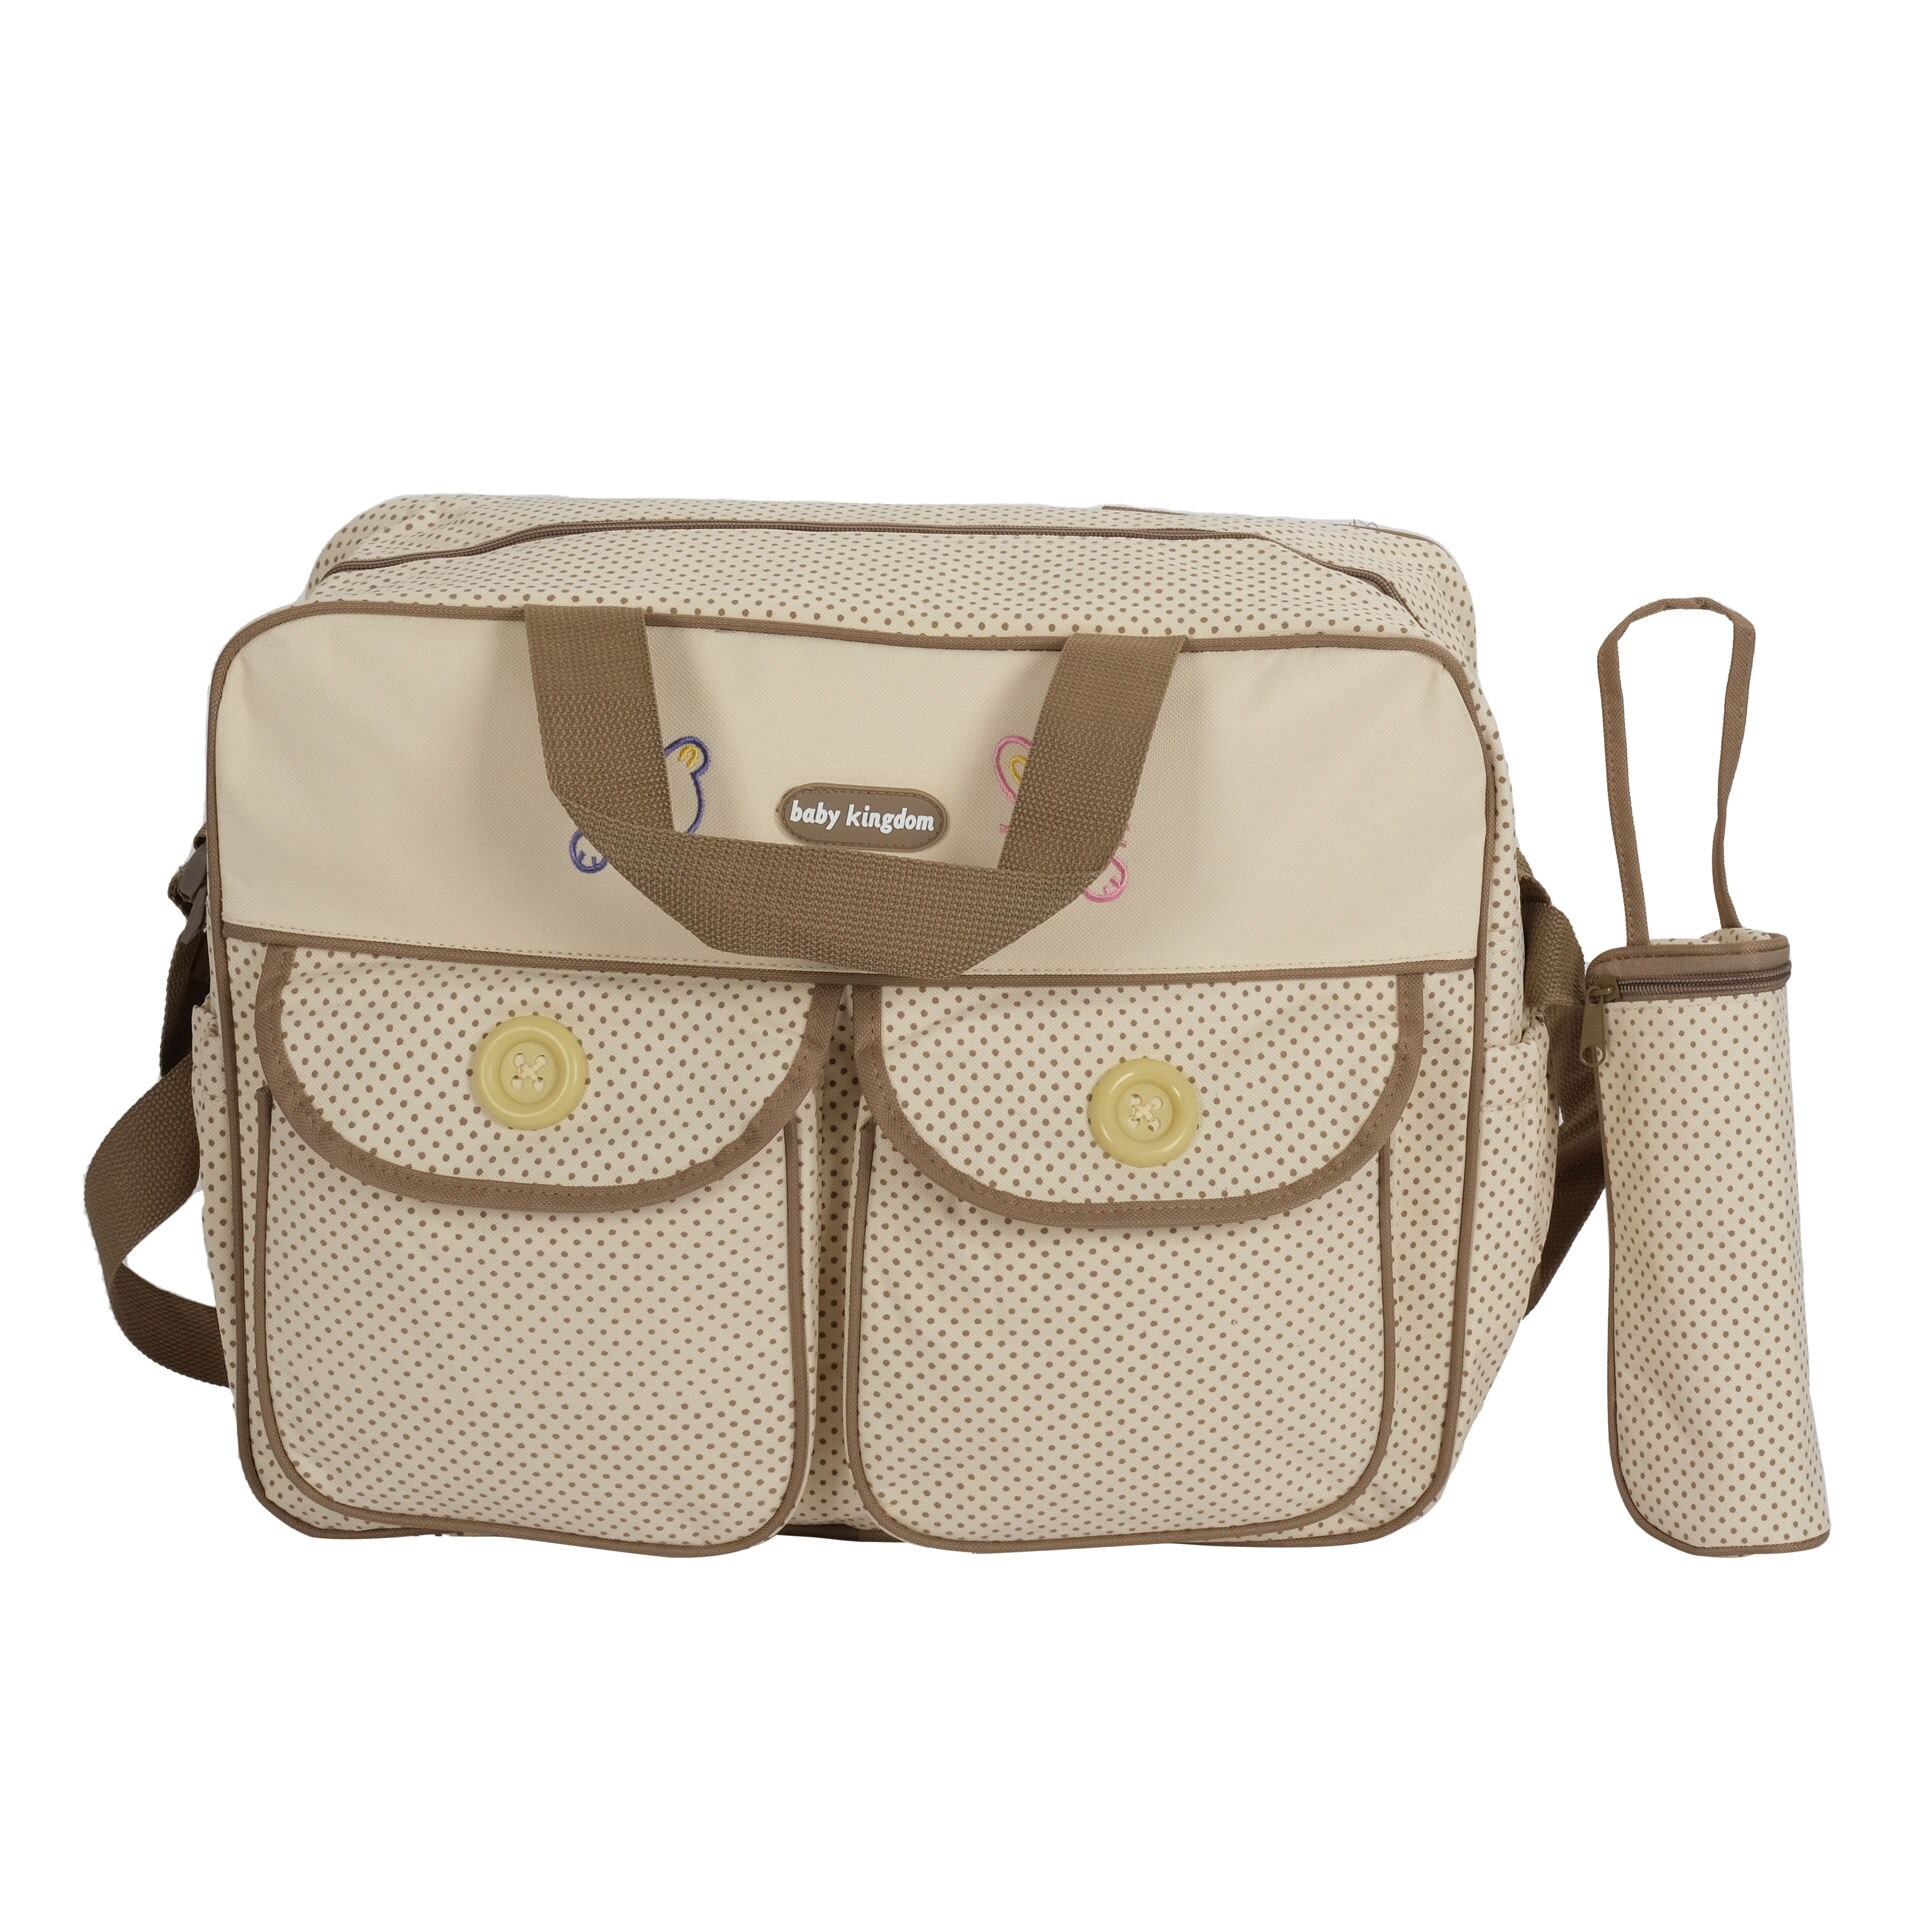 Papa Kehte Hain: Baby Diaper Bag Essential Contents